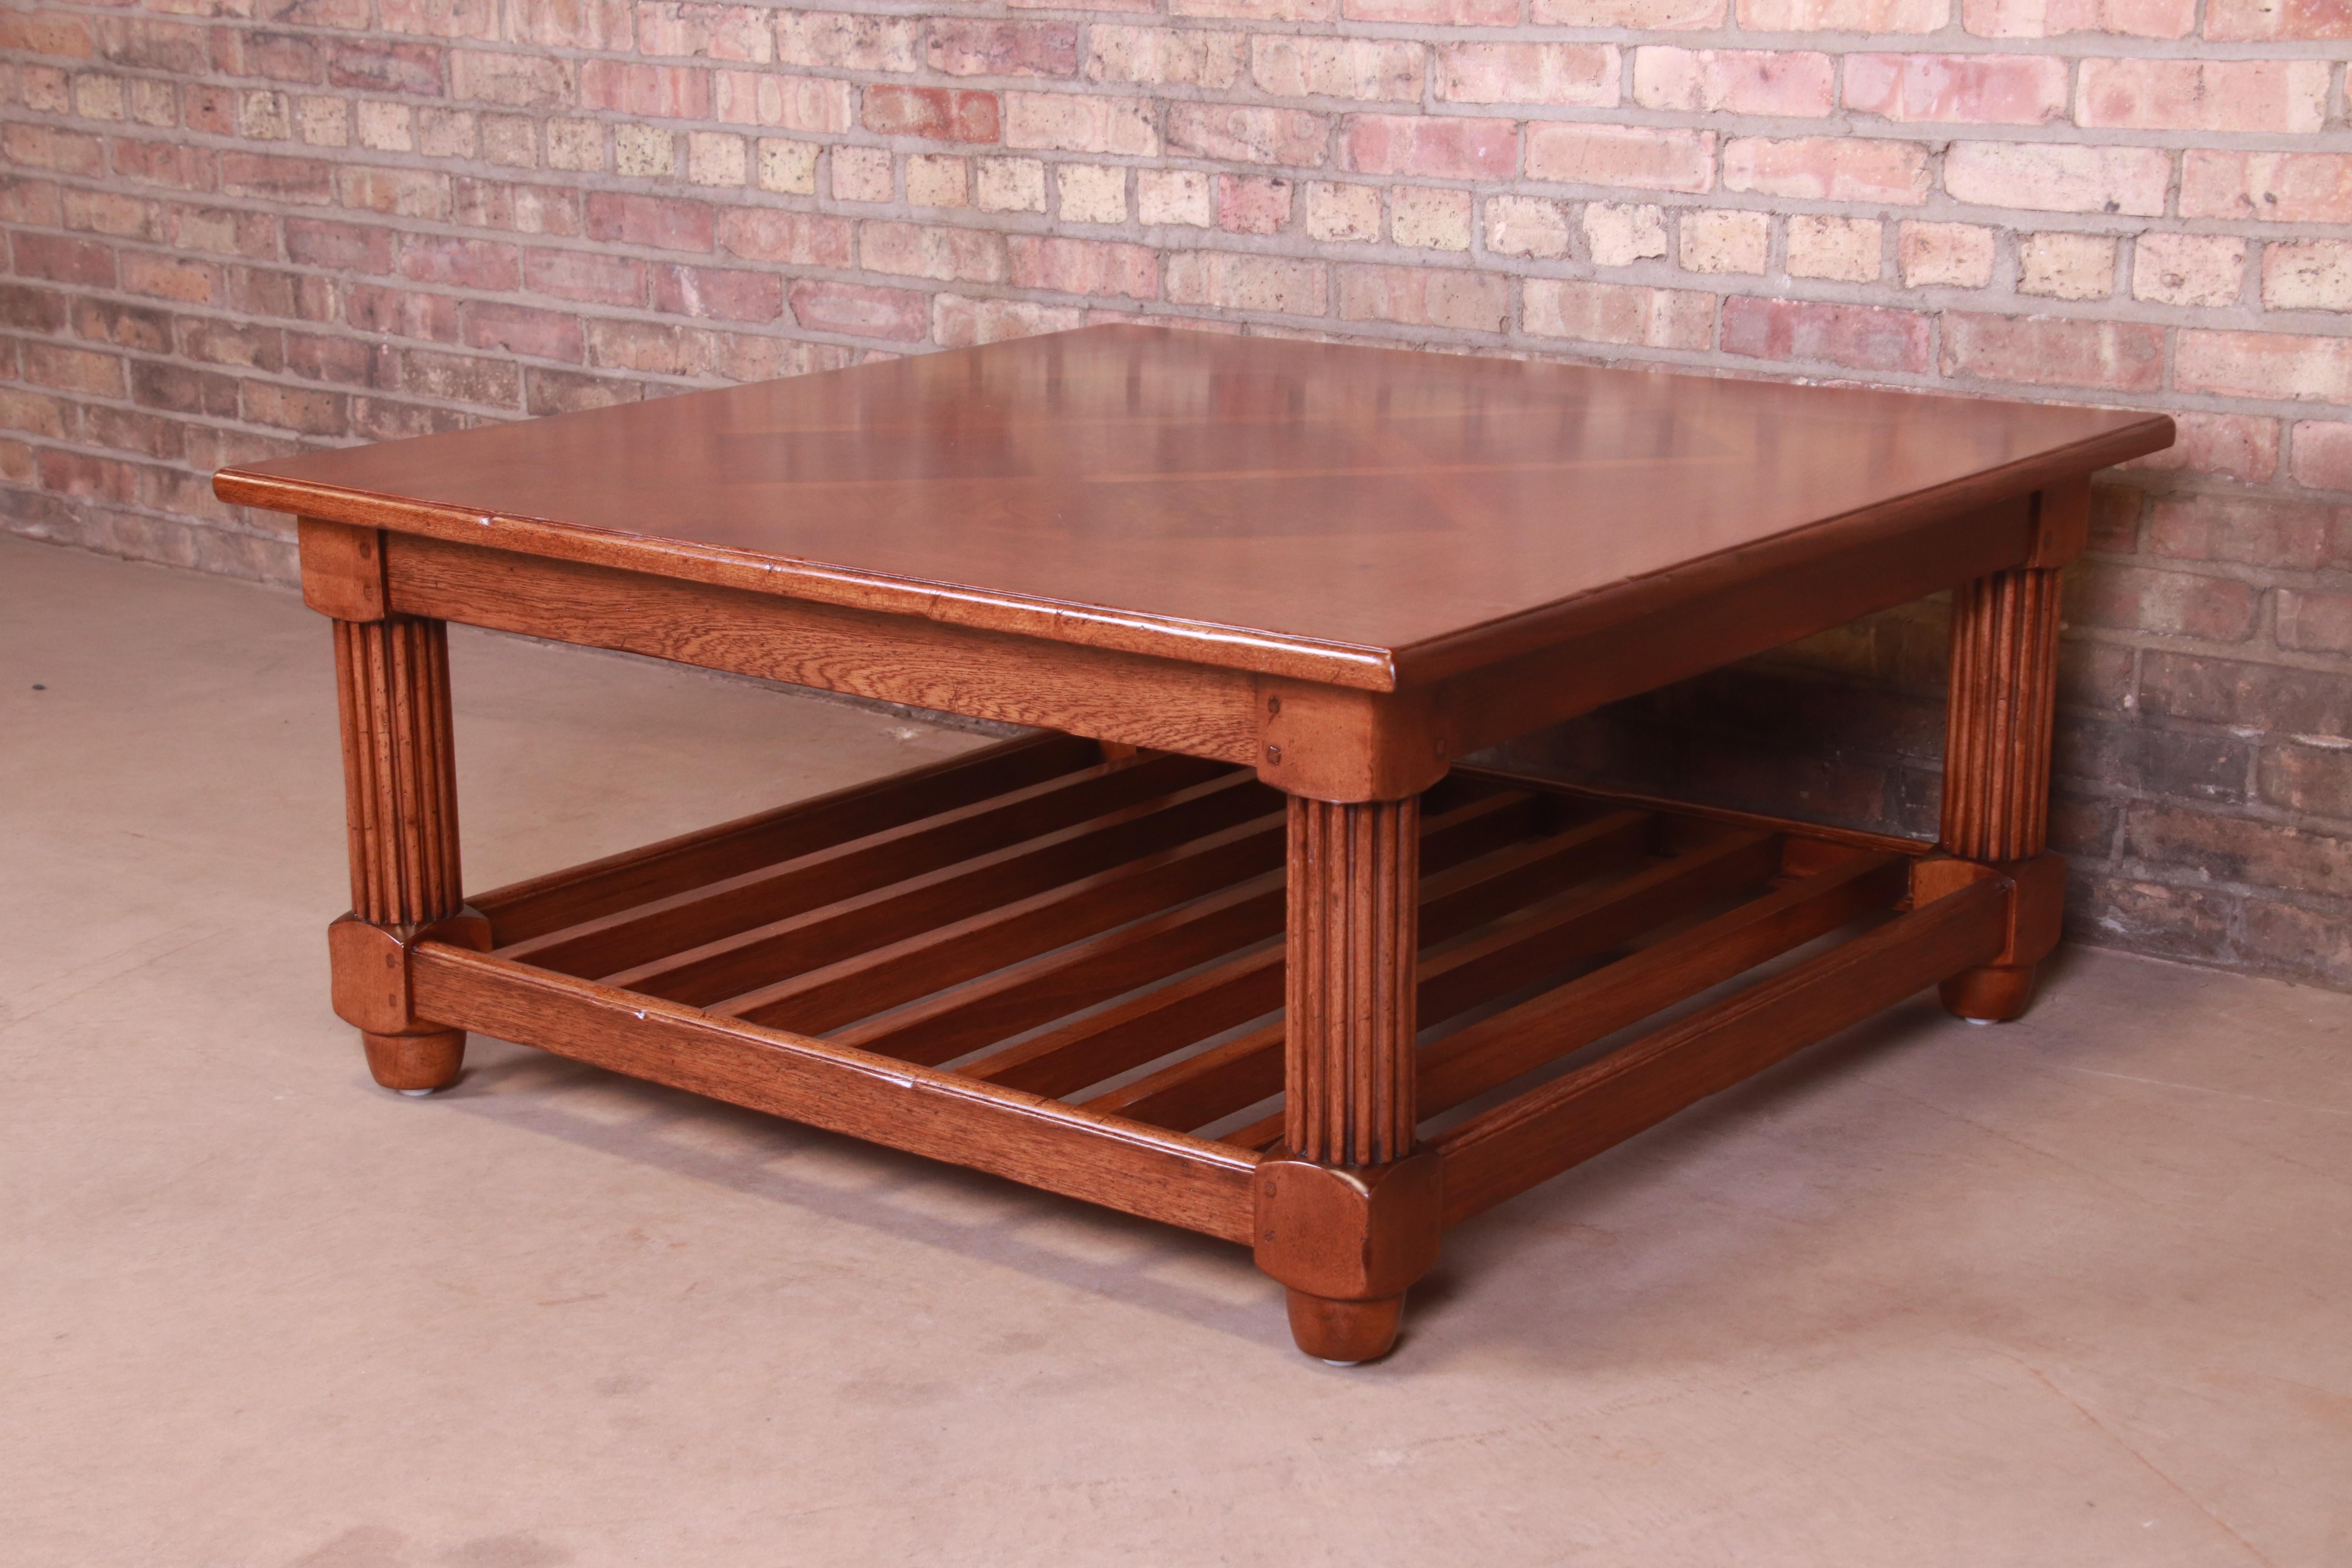 An exceptional Italian Provincial coffee or cocktail table

By Baker Furniture 